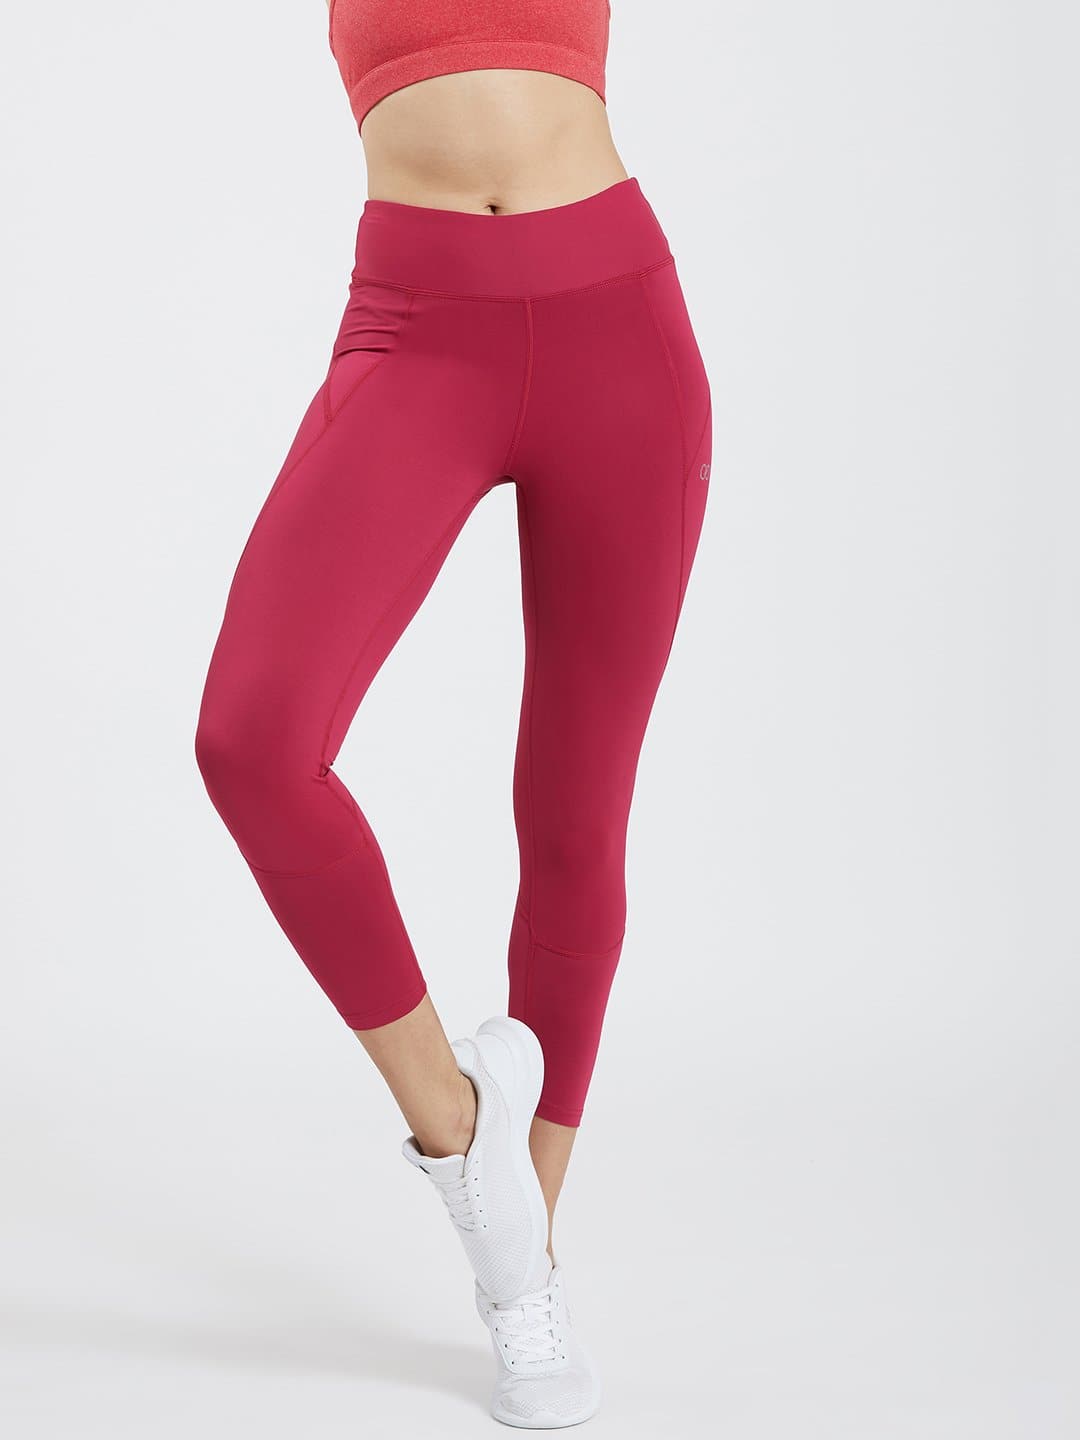 Red Ankle Length Leggings | NAFAL01-Red | Cilory.com